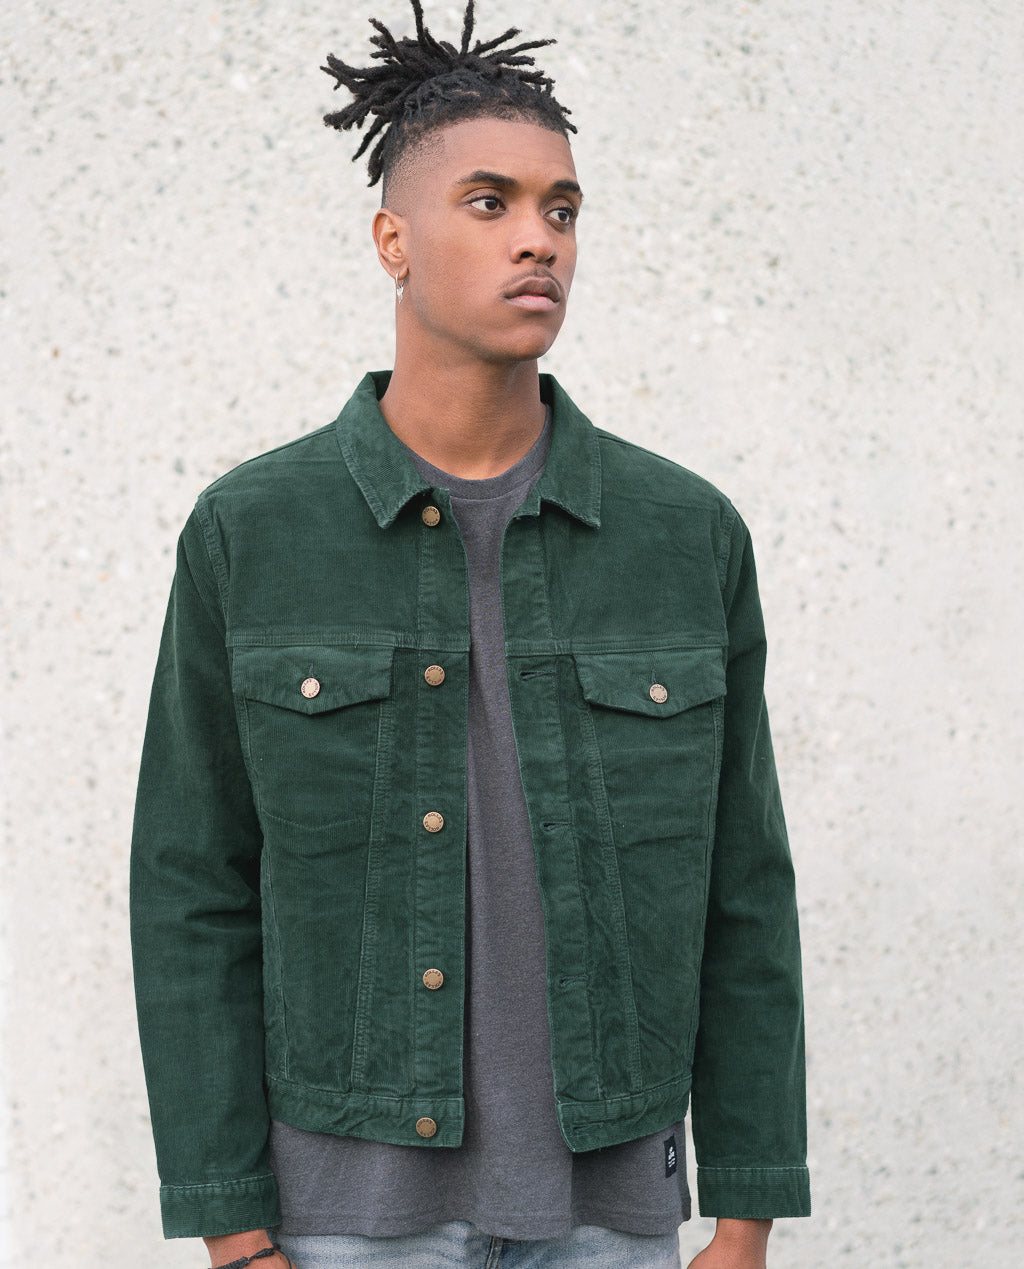 Green Denim Jacket with Jacket Summer Outfits For Men (2 ideas & outfits) |  Lookastic